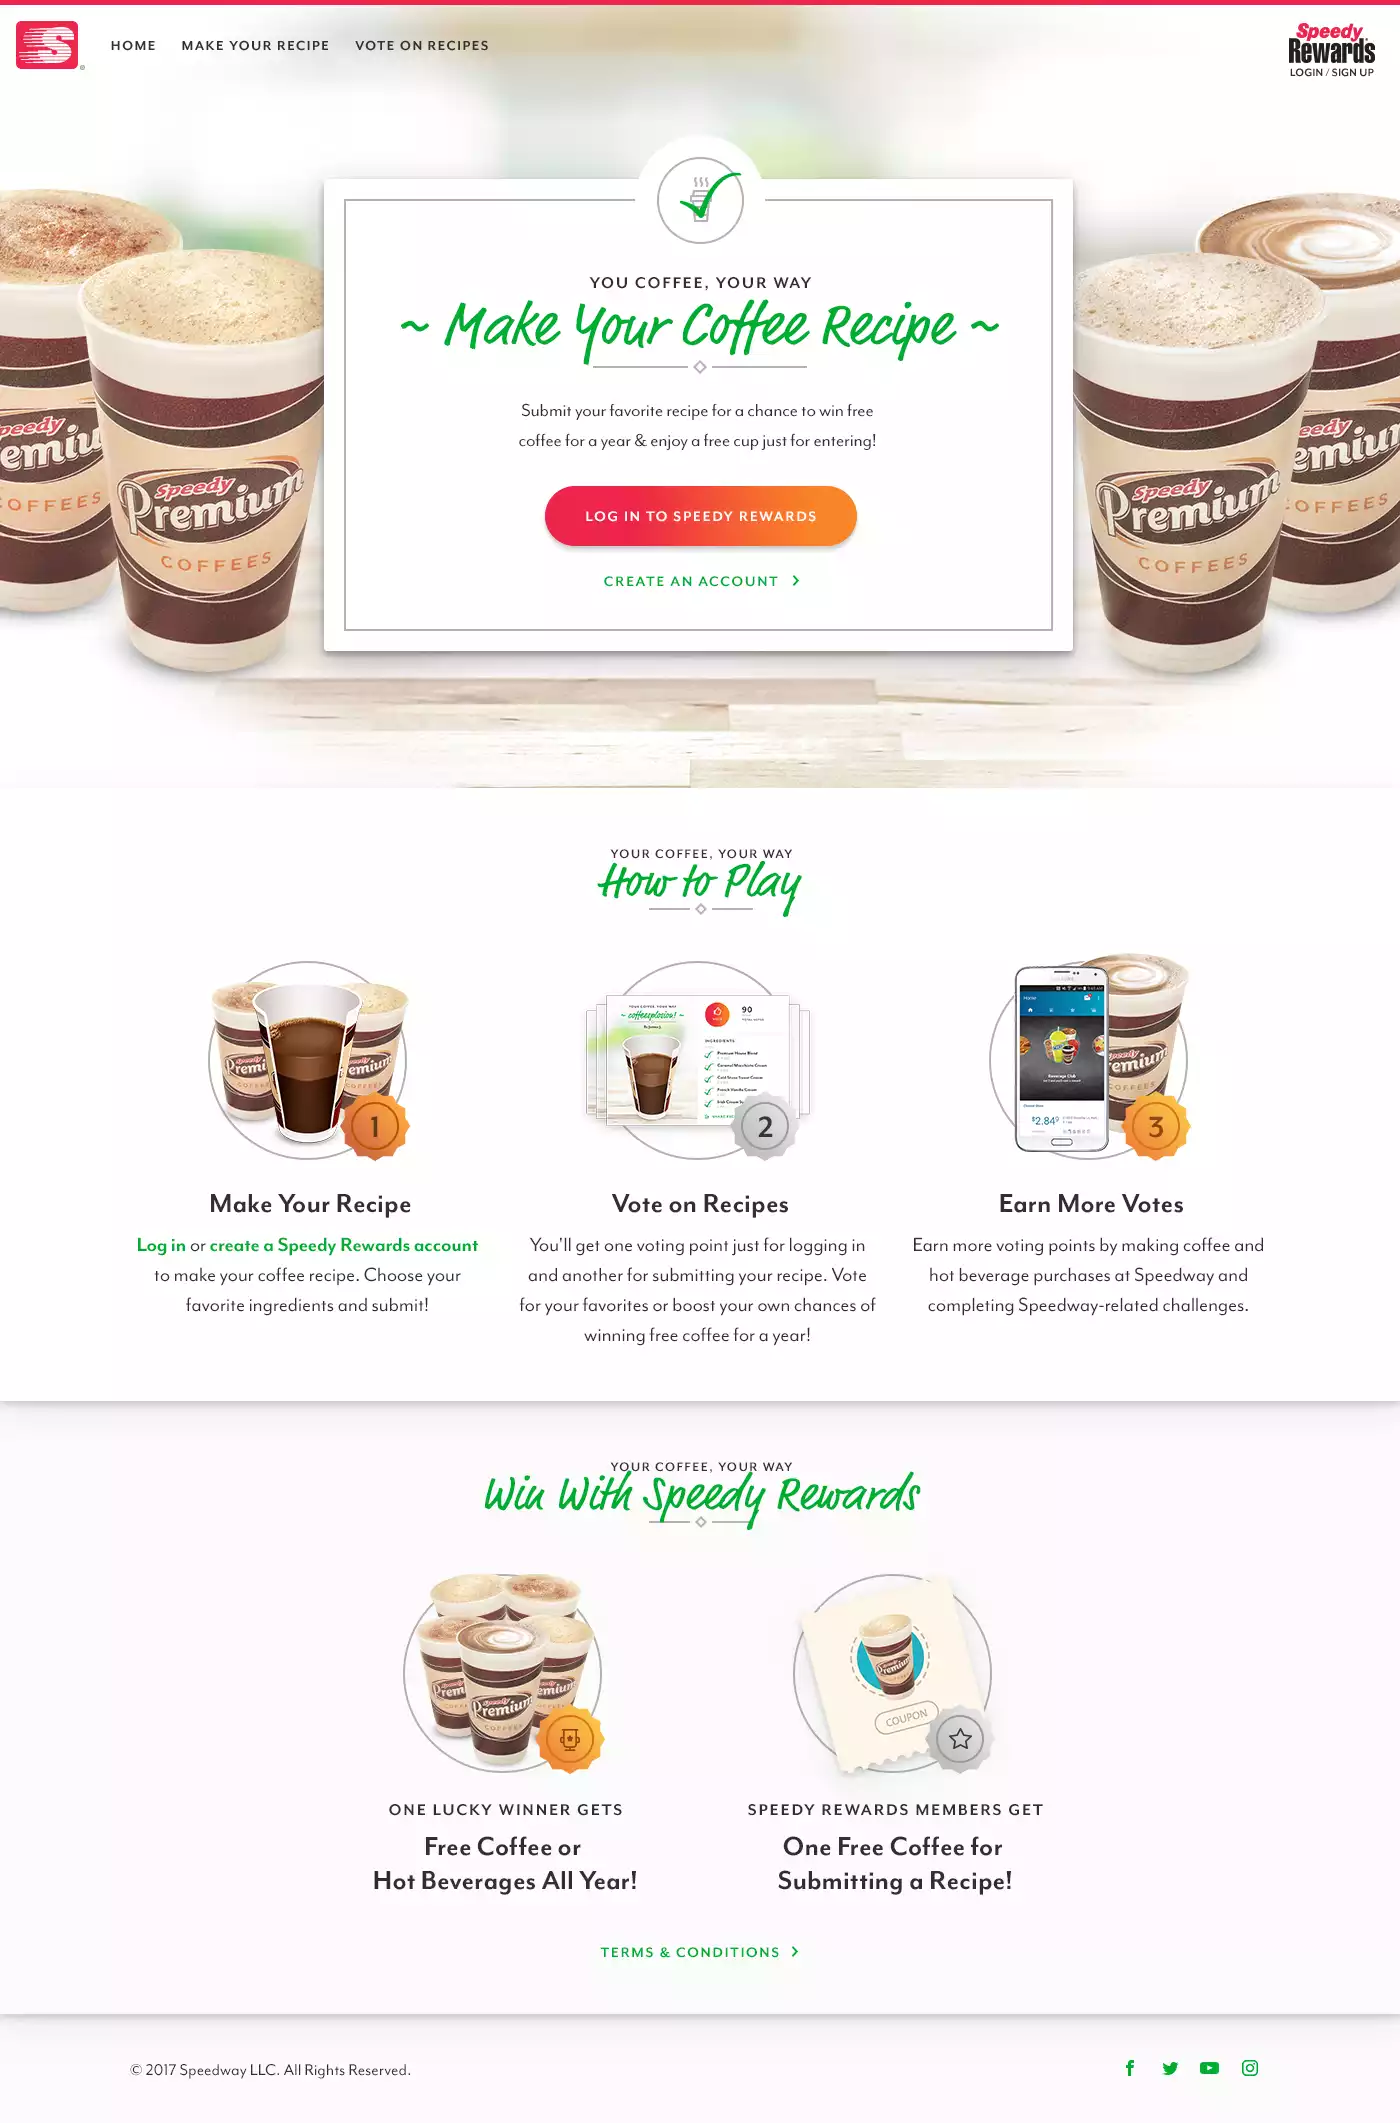 Your Coffee Your Way Home screen